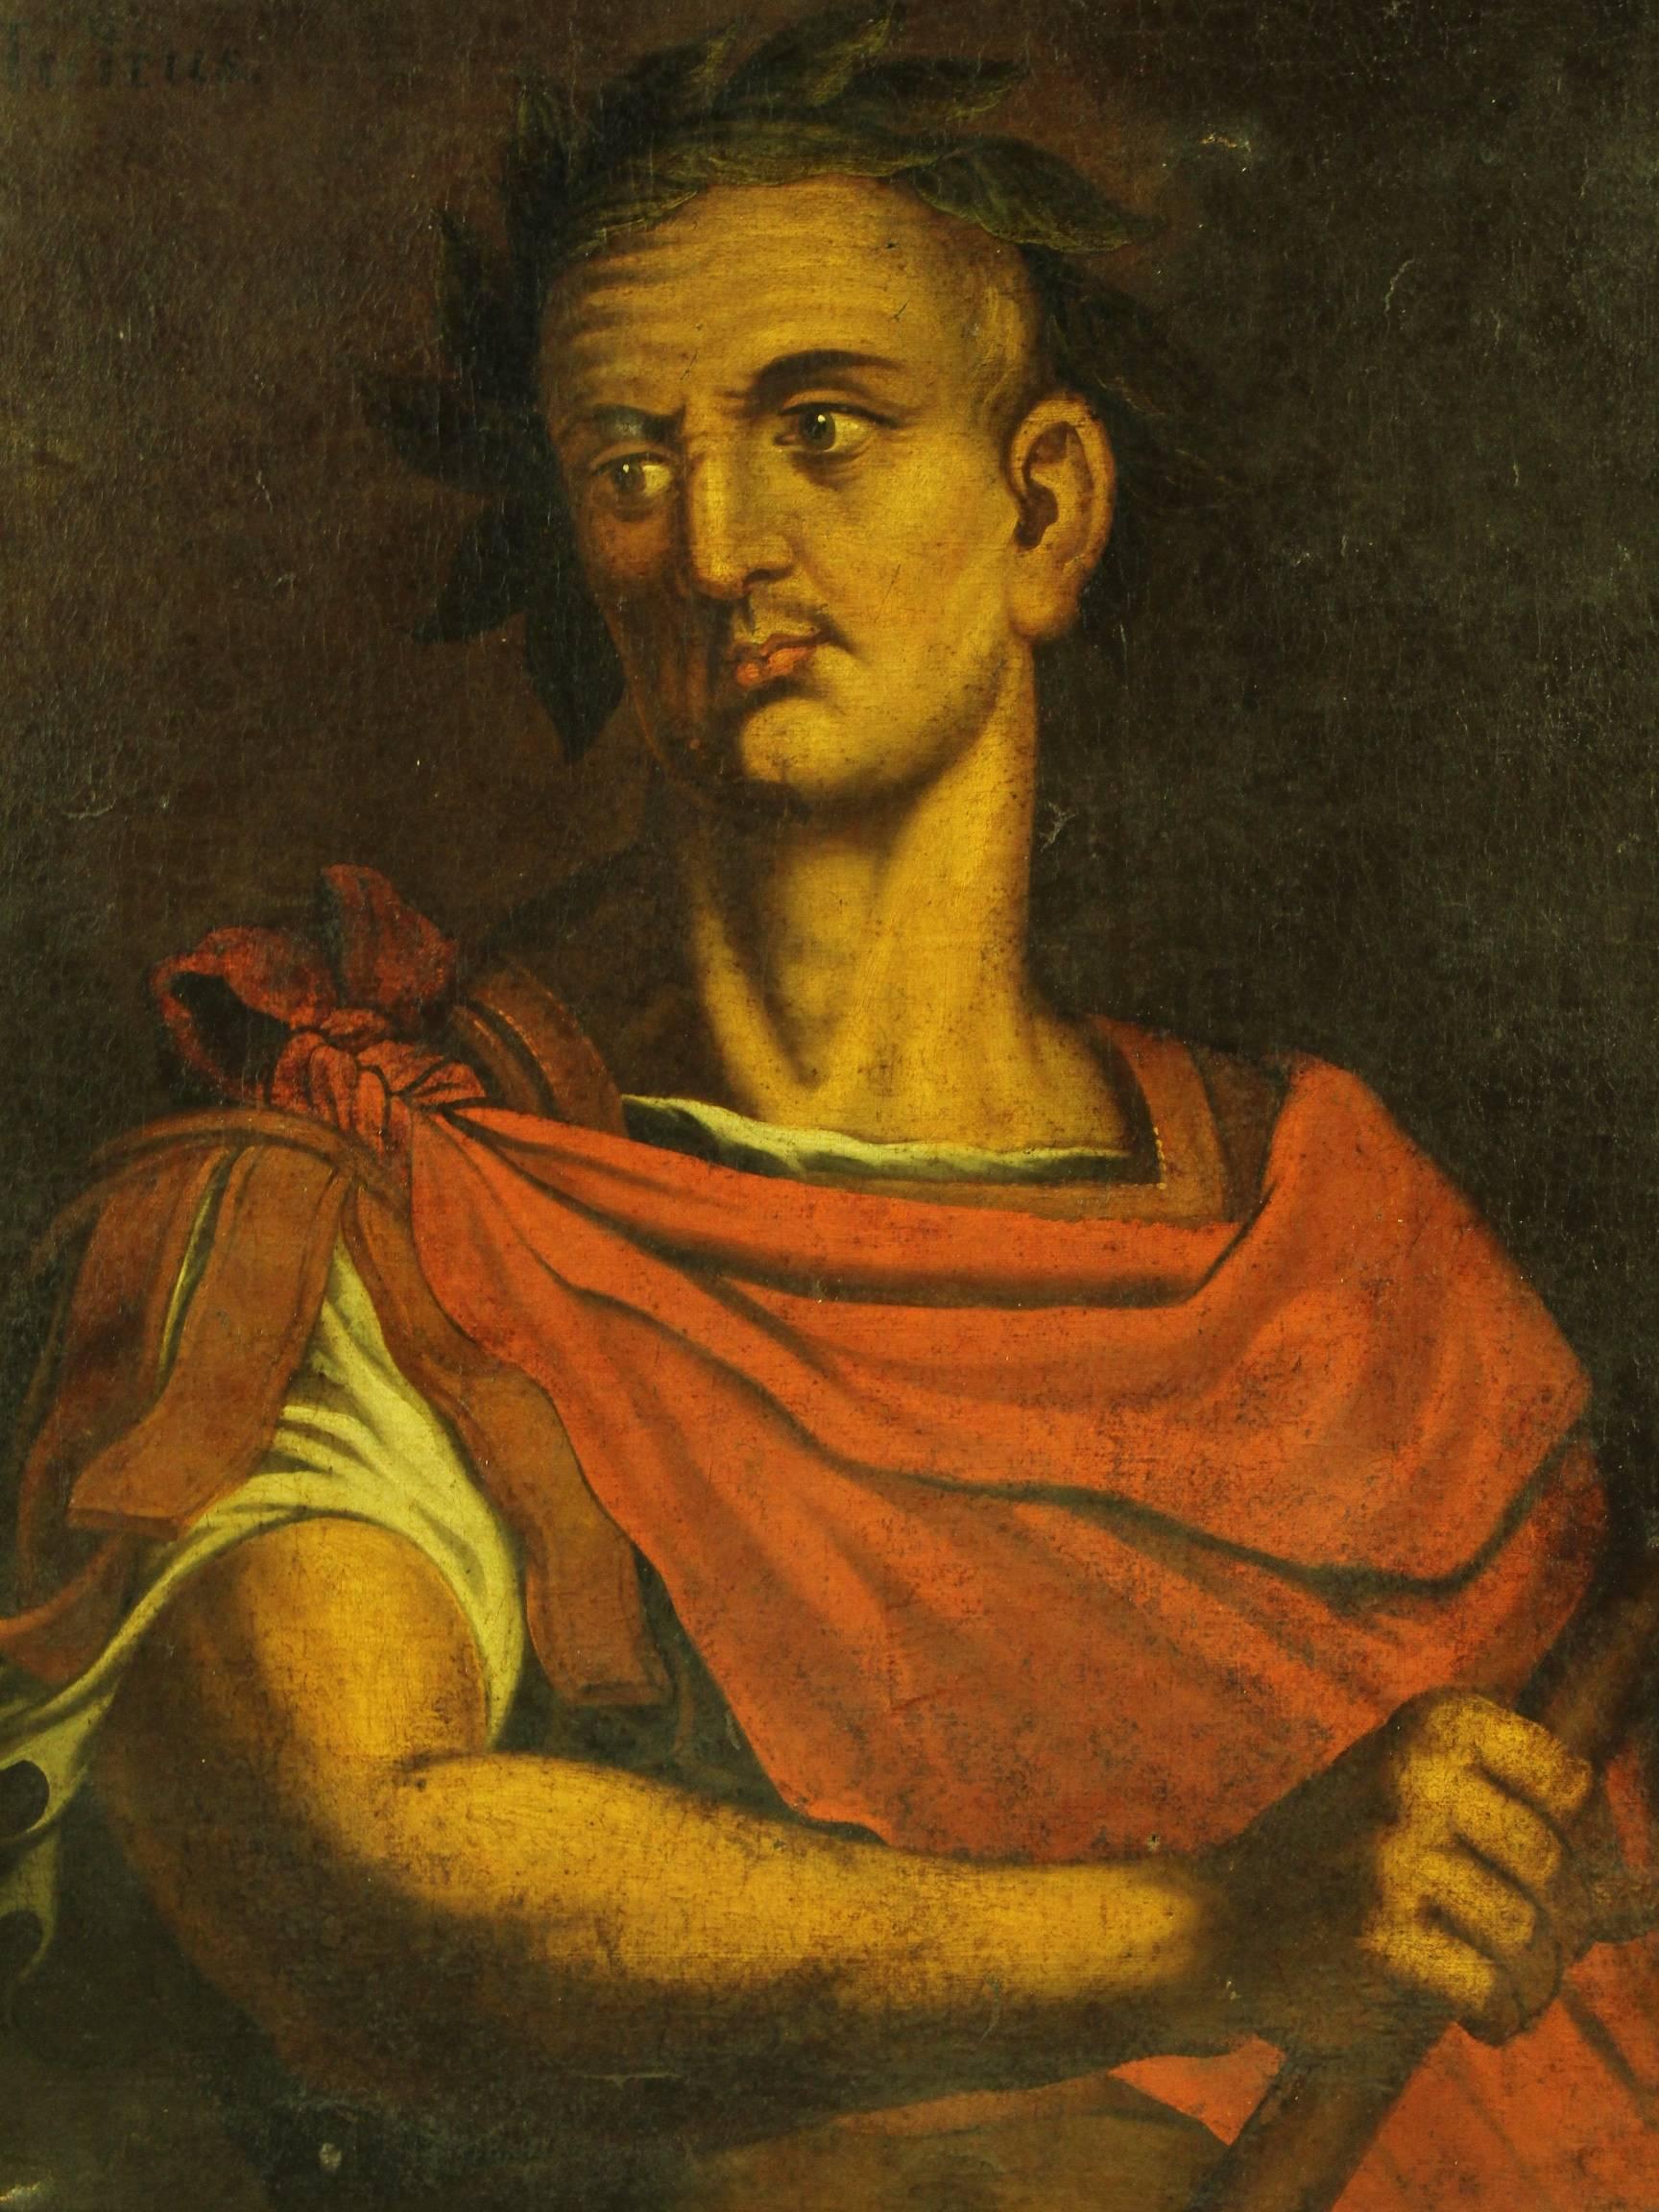 Ancient Italian painting of the 18th century. Work oil on canvas depicting the portrait of Julius Caesar. Contemporary frame made by carved and gilded wood with different signs of aging. Painting of great intensity and character. It shows several